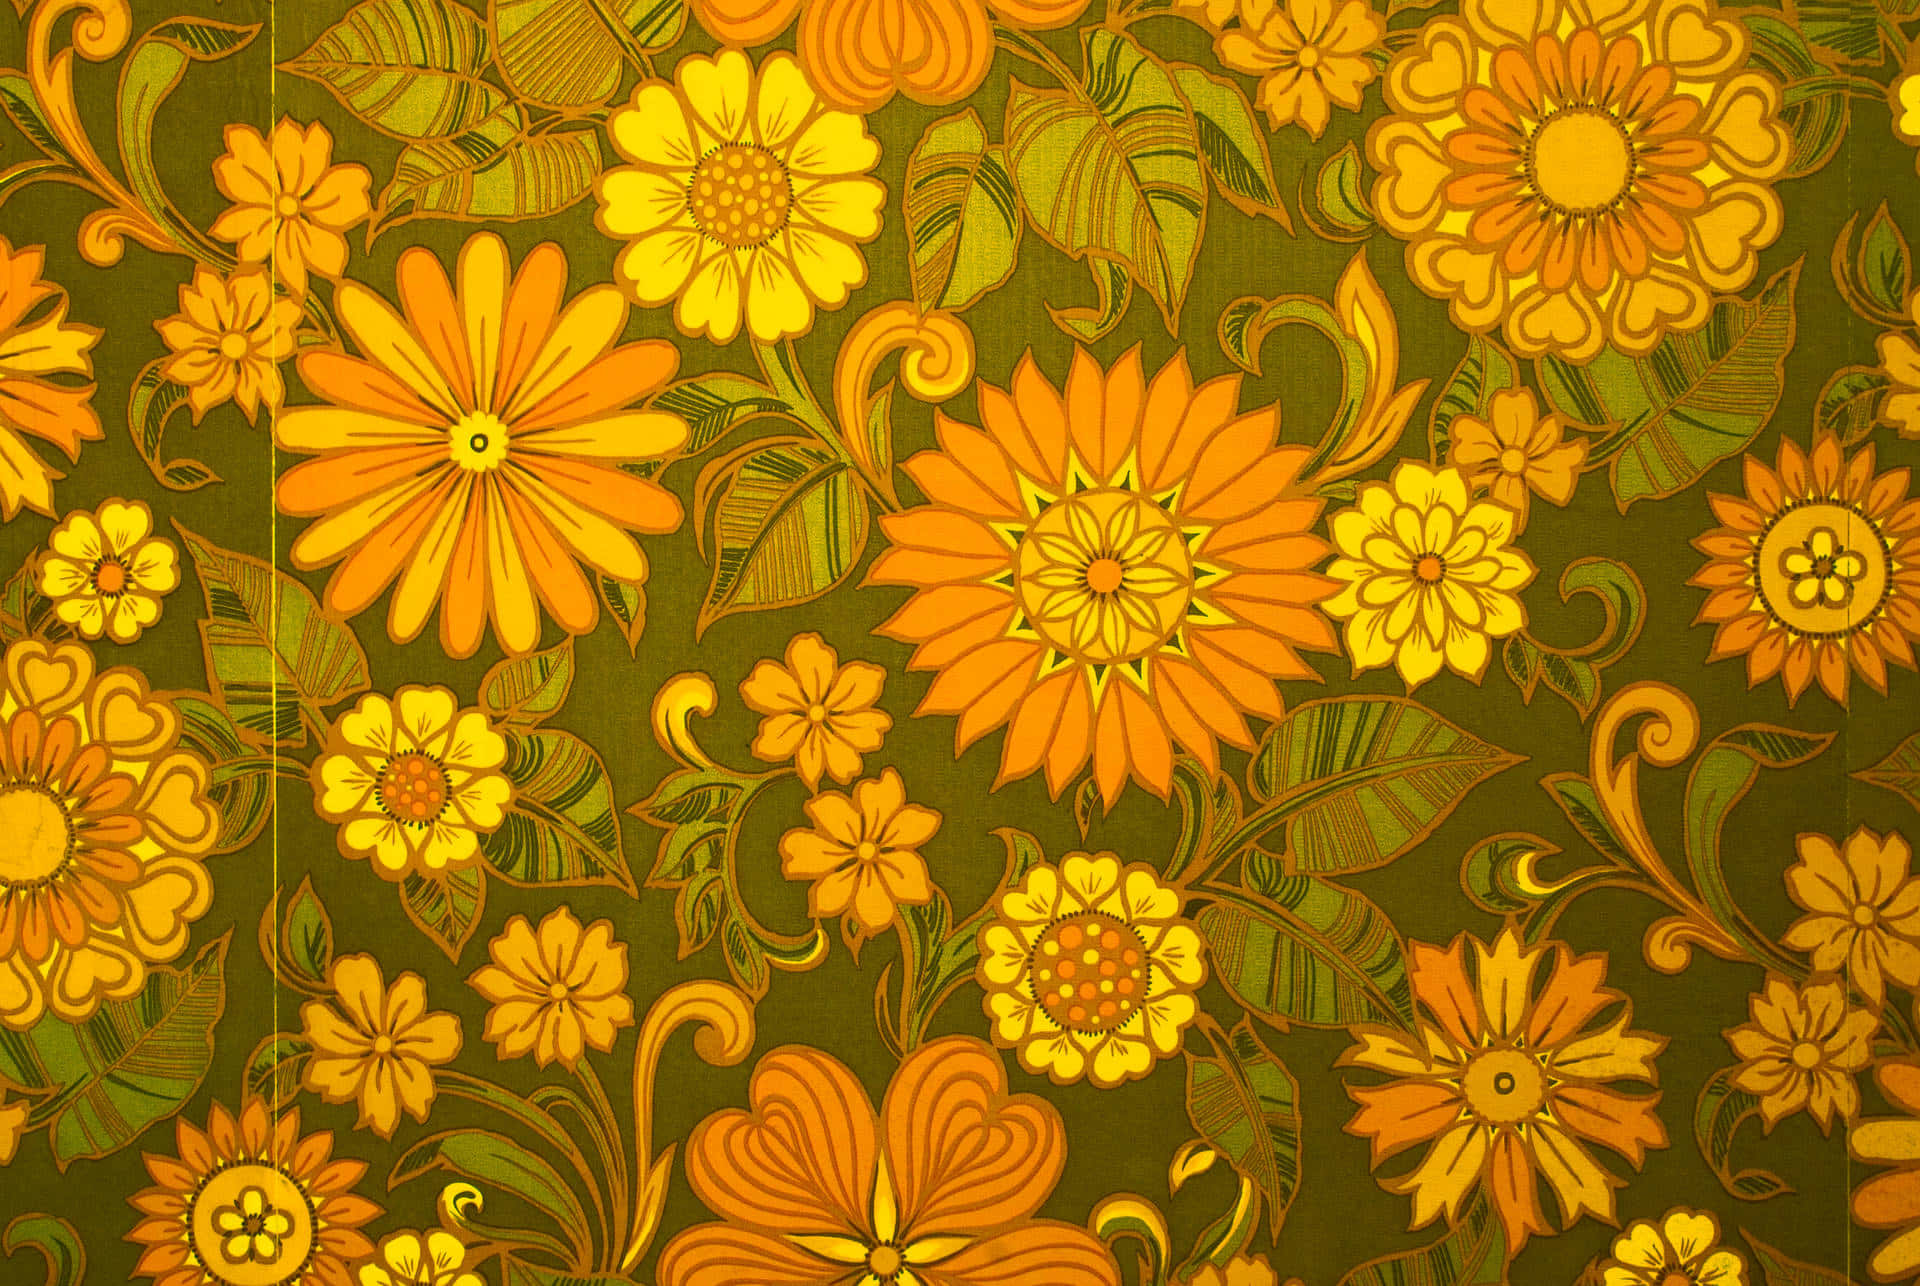 A Floral Wallpaper With Orange And Yellow Flowers Wallpaper